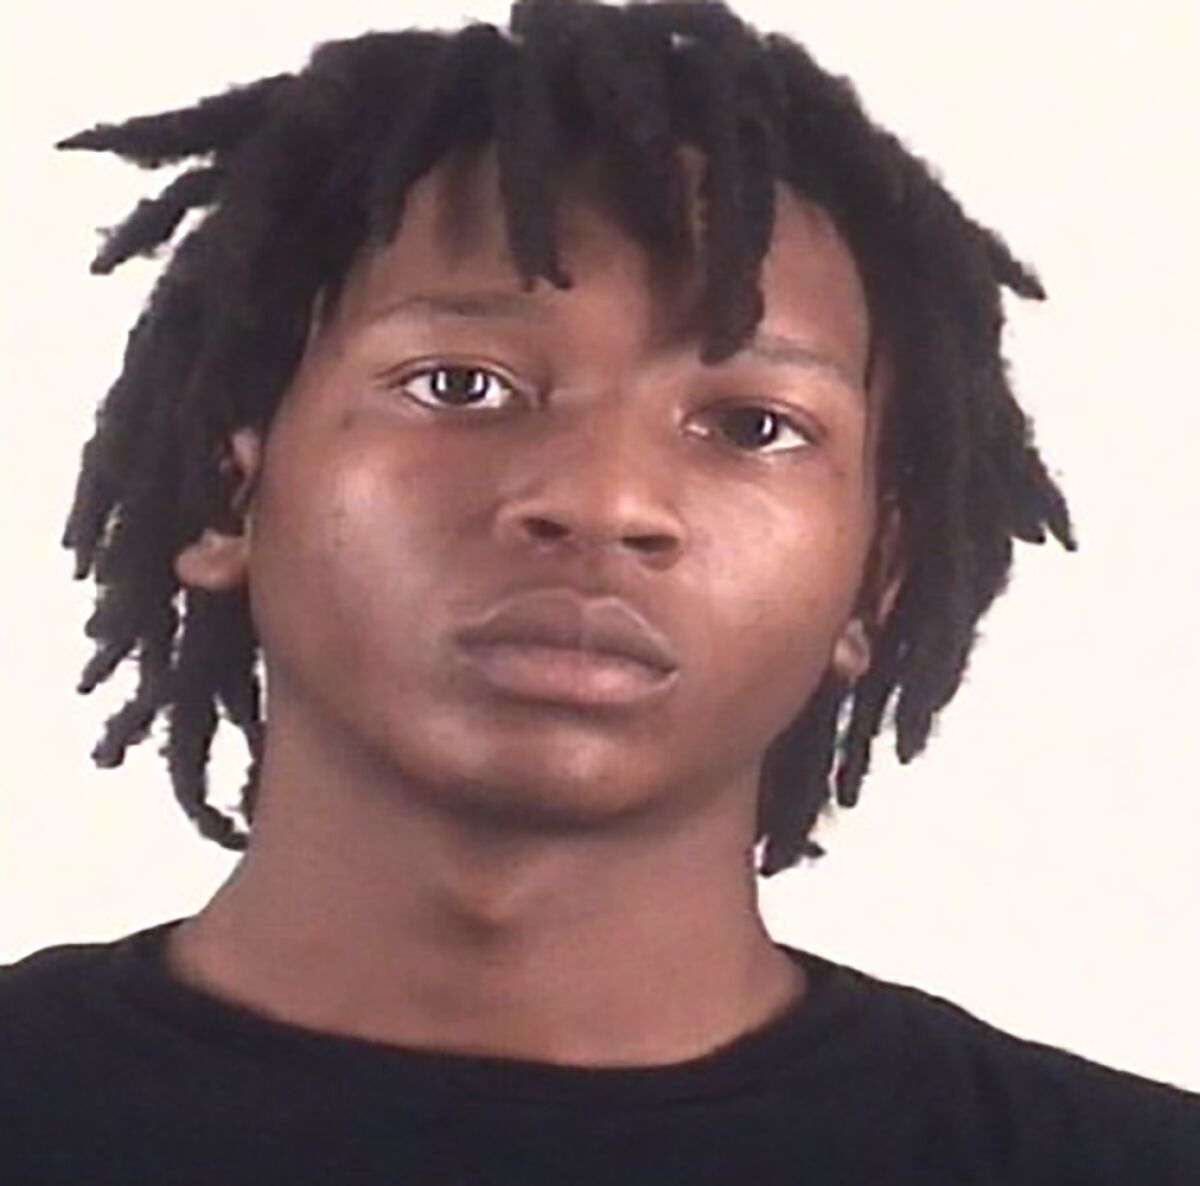 This image provided by the Tarrant County, Texas, Sheriff’s Office, shows Timothy George Simpkins. The 18-year-old student was indicted on Friday, Feb. 11, 2022, on attempted murder and aggravated assault charges for an Oct. 6 shooting at a Dallas-area high school that wounded two students and a teacher. (Tarrant County Sheriff’s Office via AP)